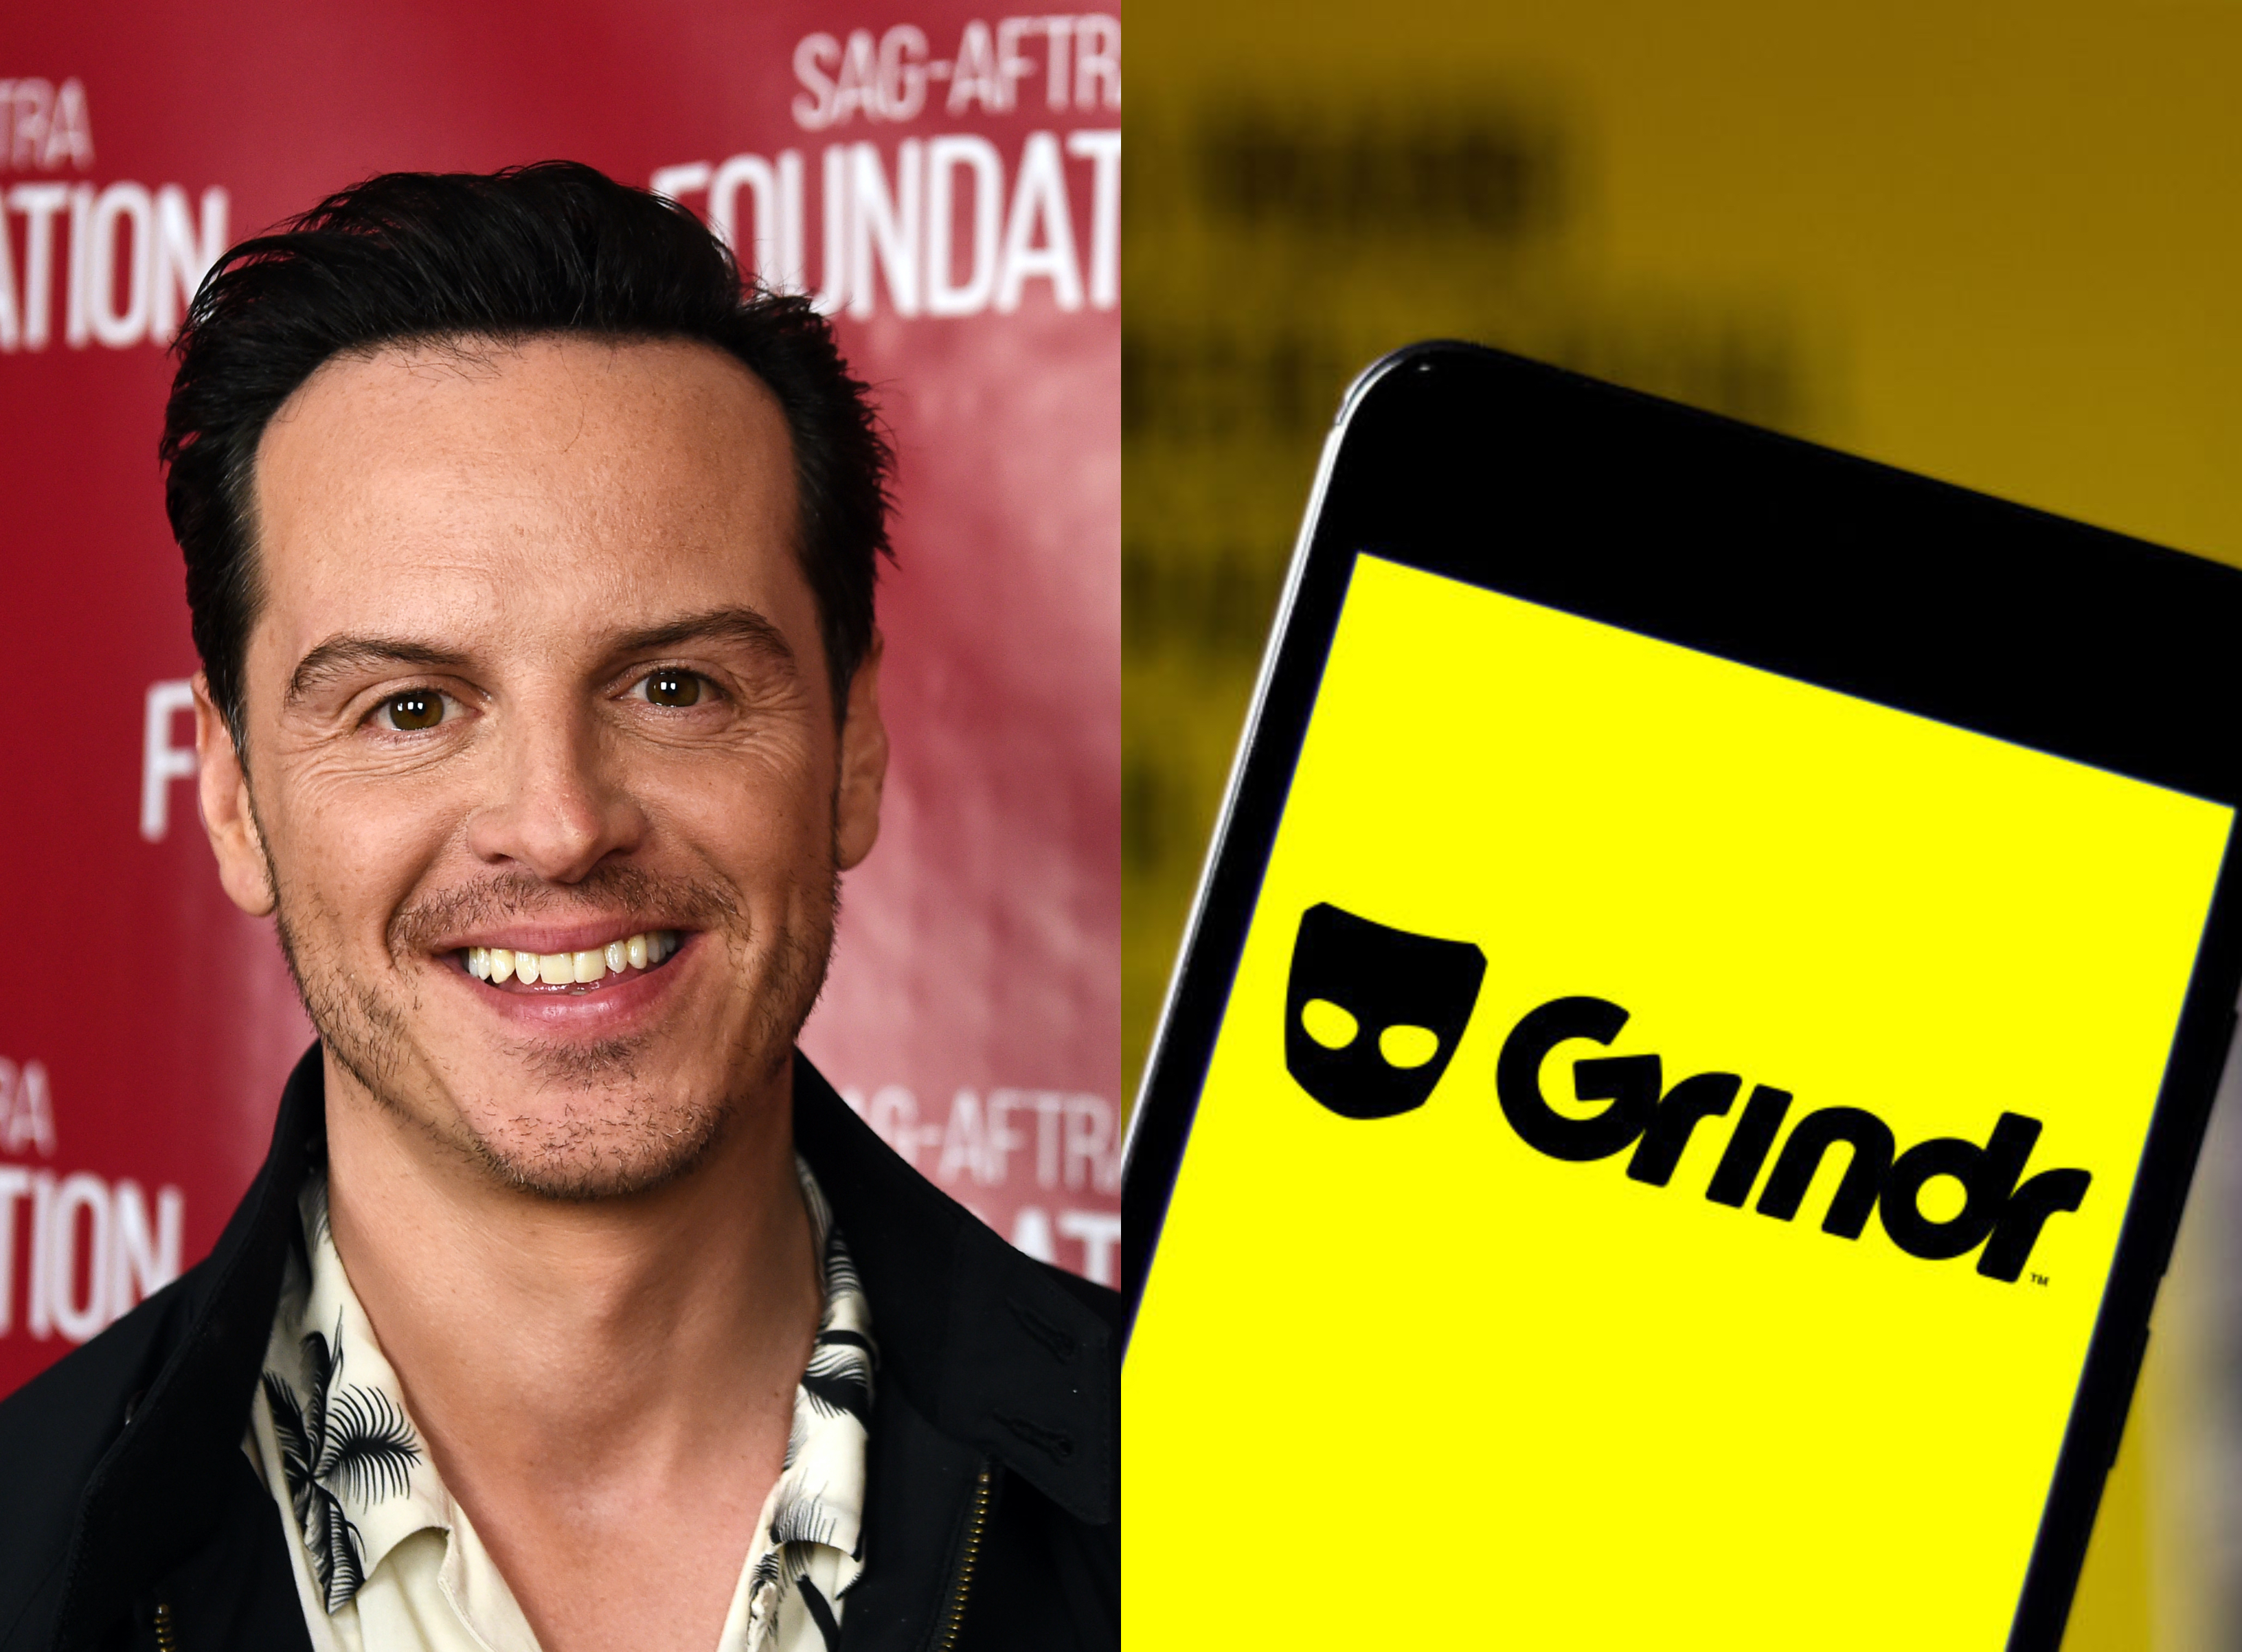 Actor Andrew Scott made headlines... for being a gay man who used gay dating app Grindr to snag a date with another gay man. (Amanda Edwards/Getty Images/Rafael Henrique/SOPA Images/LightRocket via Getty)